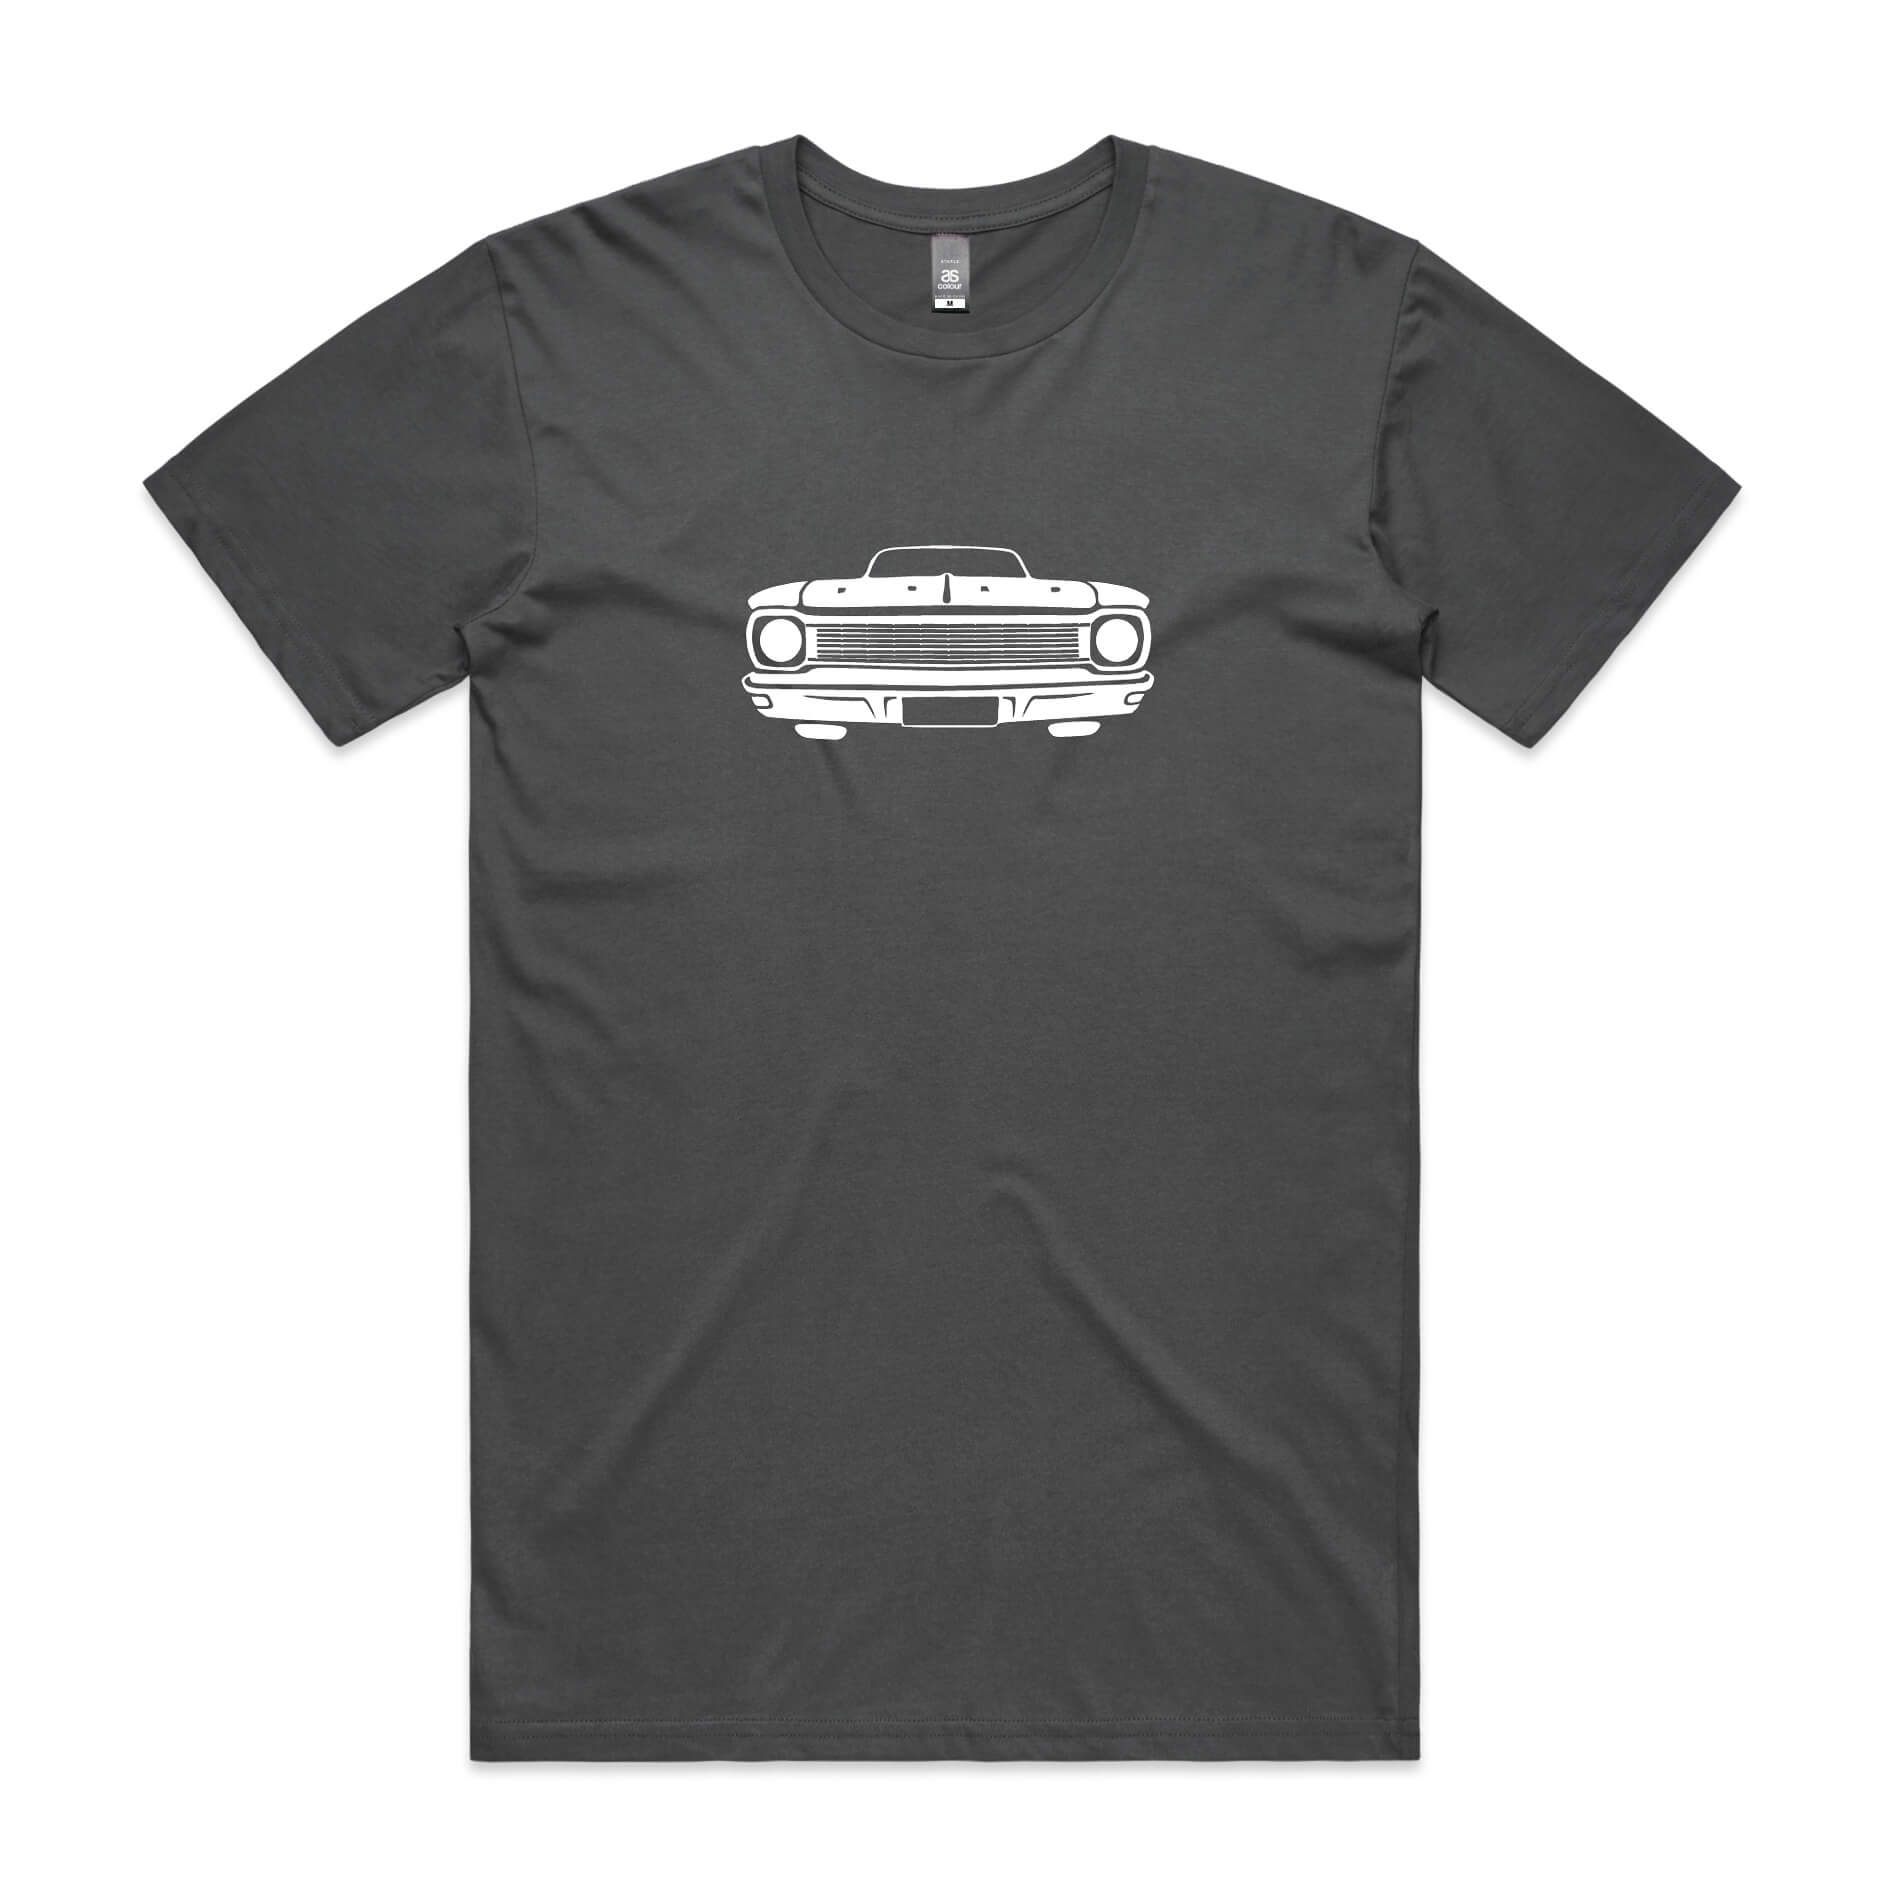 Ford XP Falcon t-shirt in charcoal grey